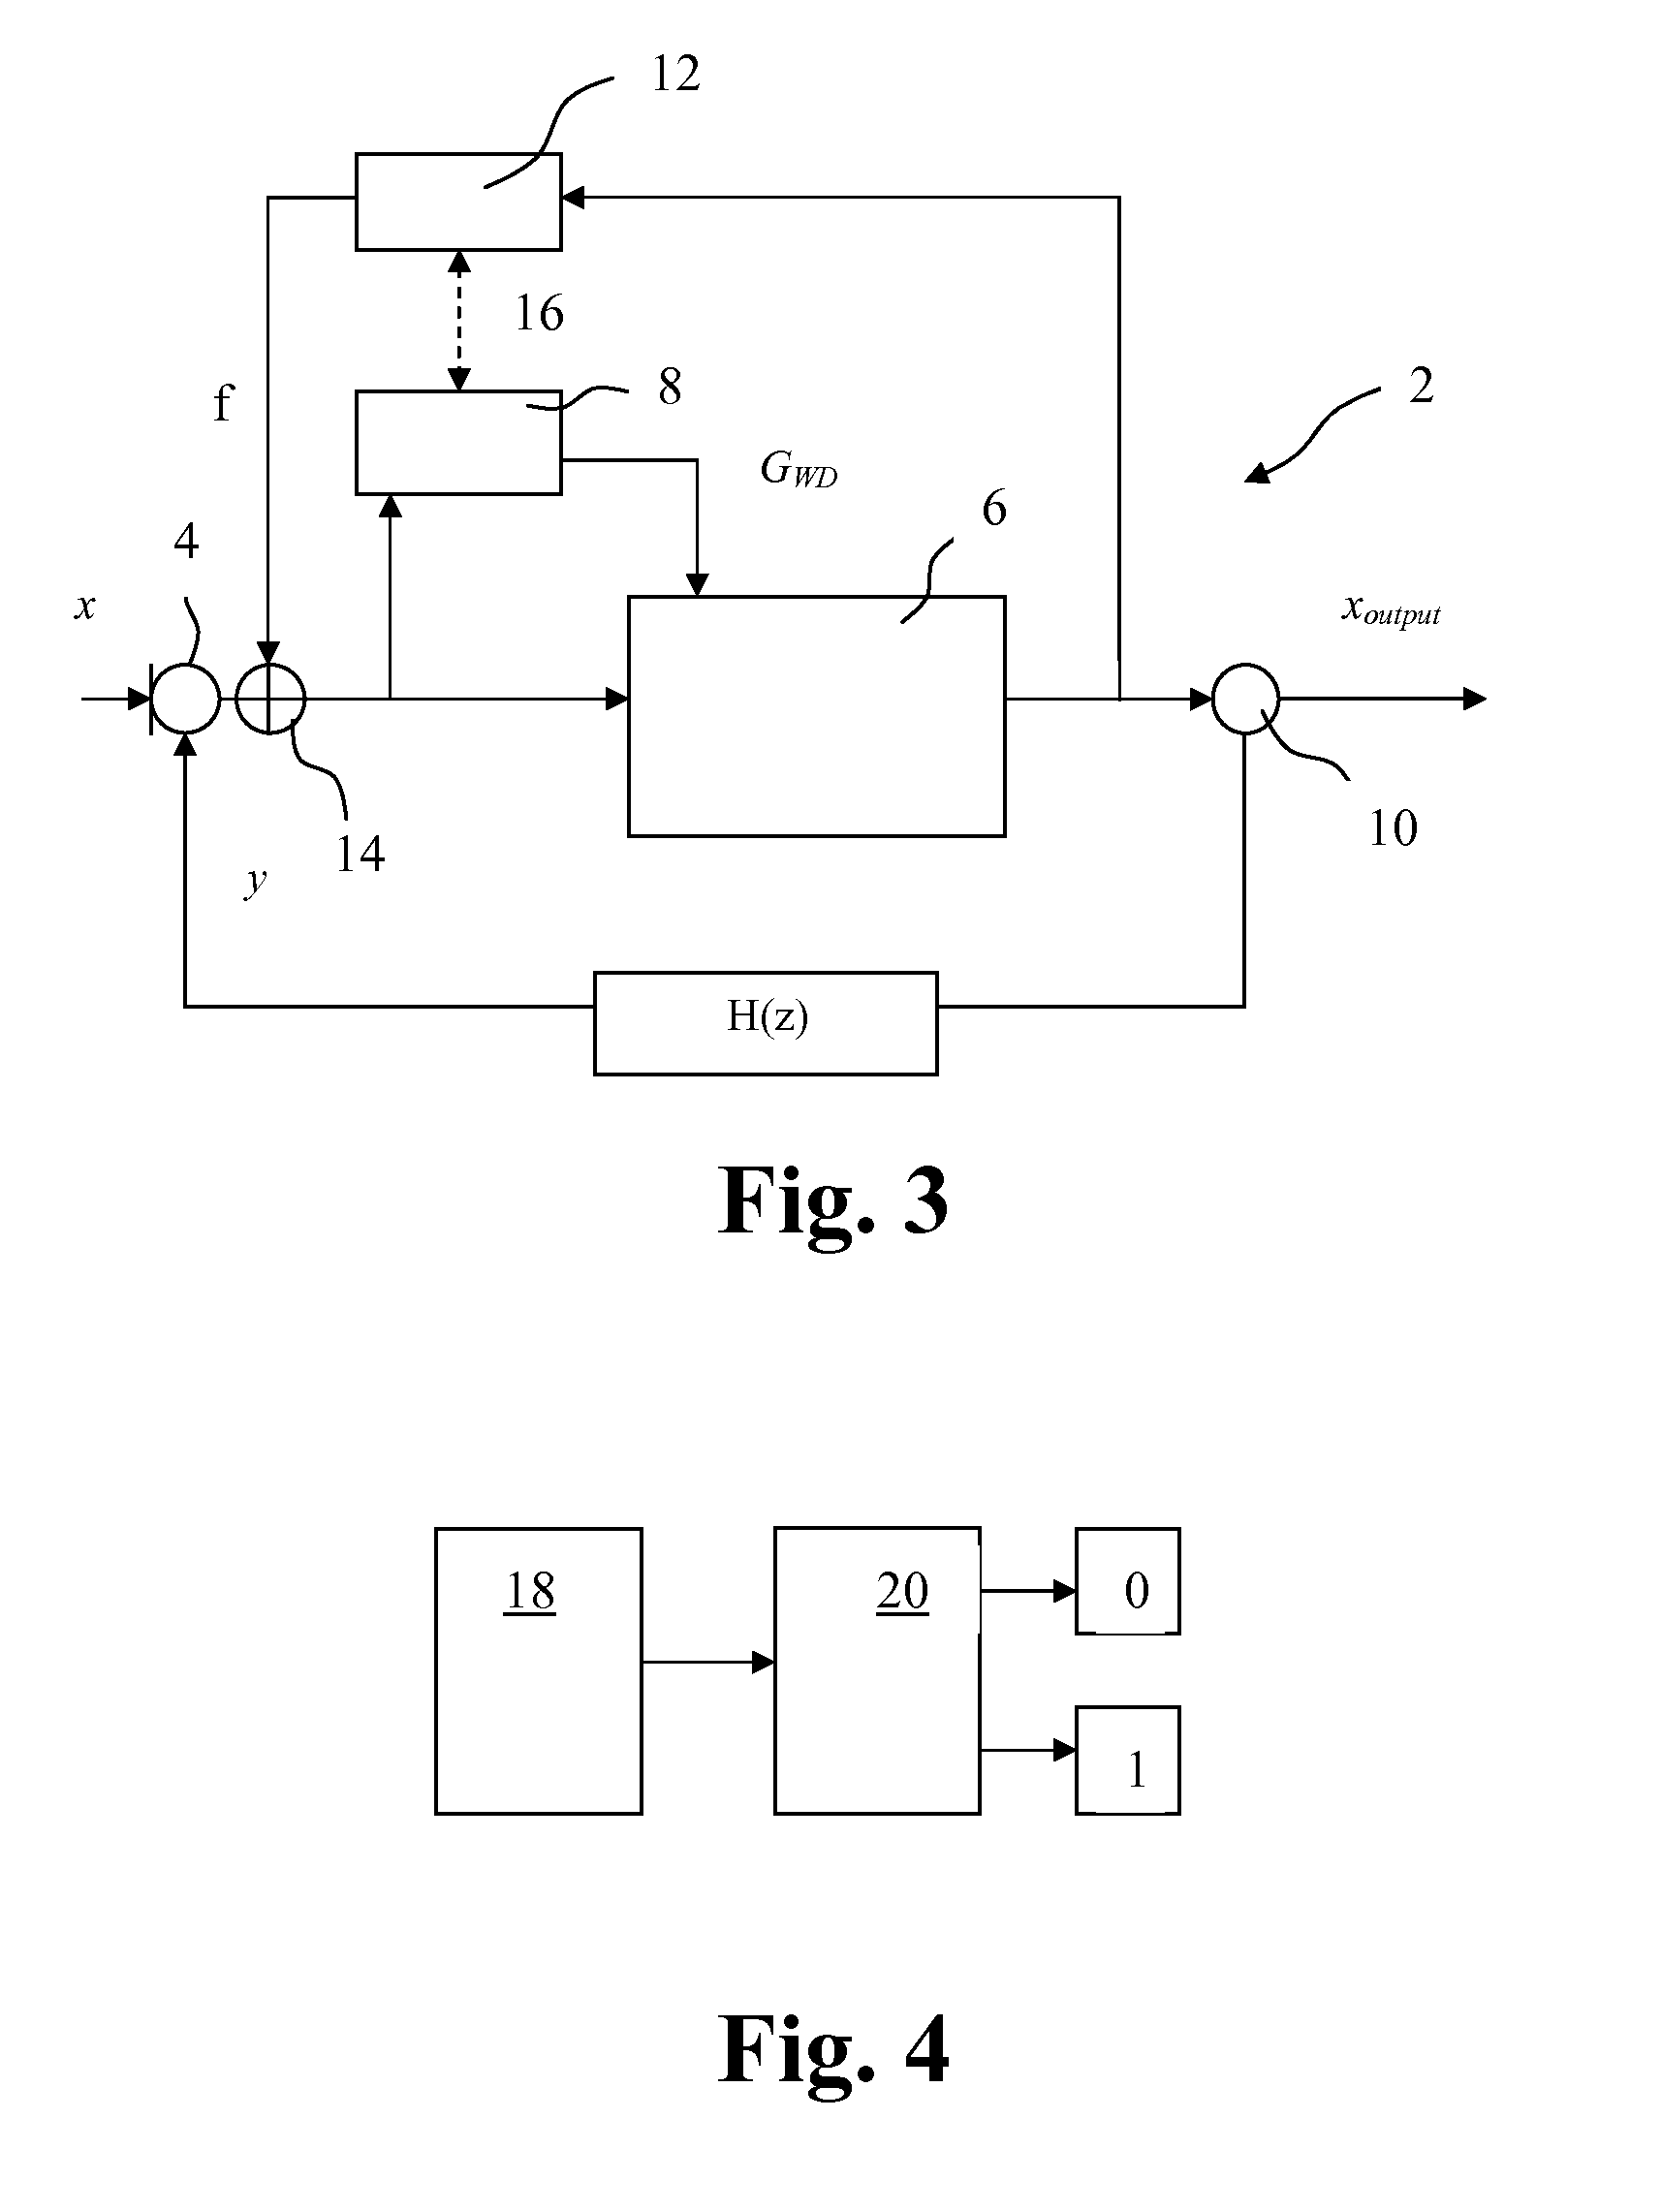 Method for the detection of whistling in an audio system